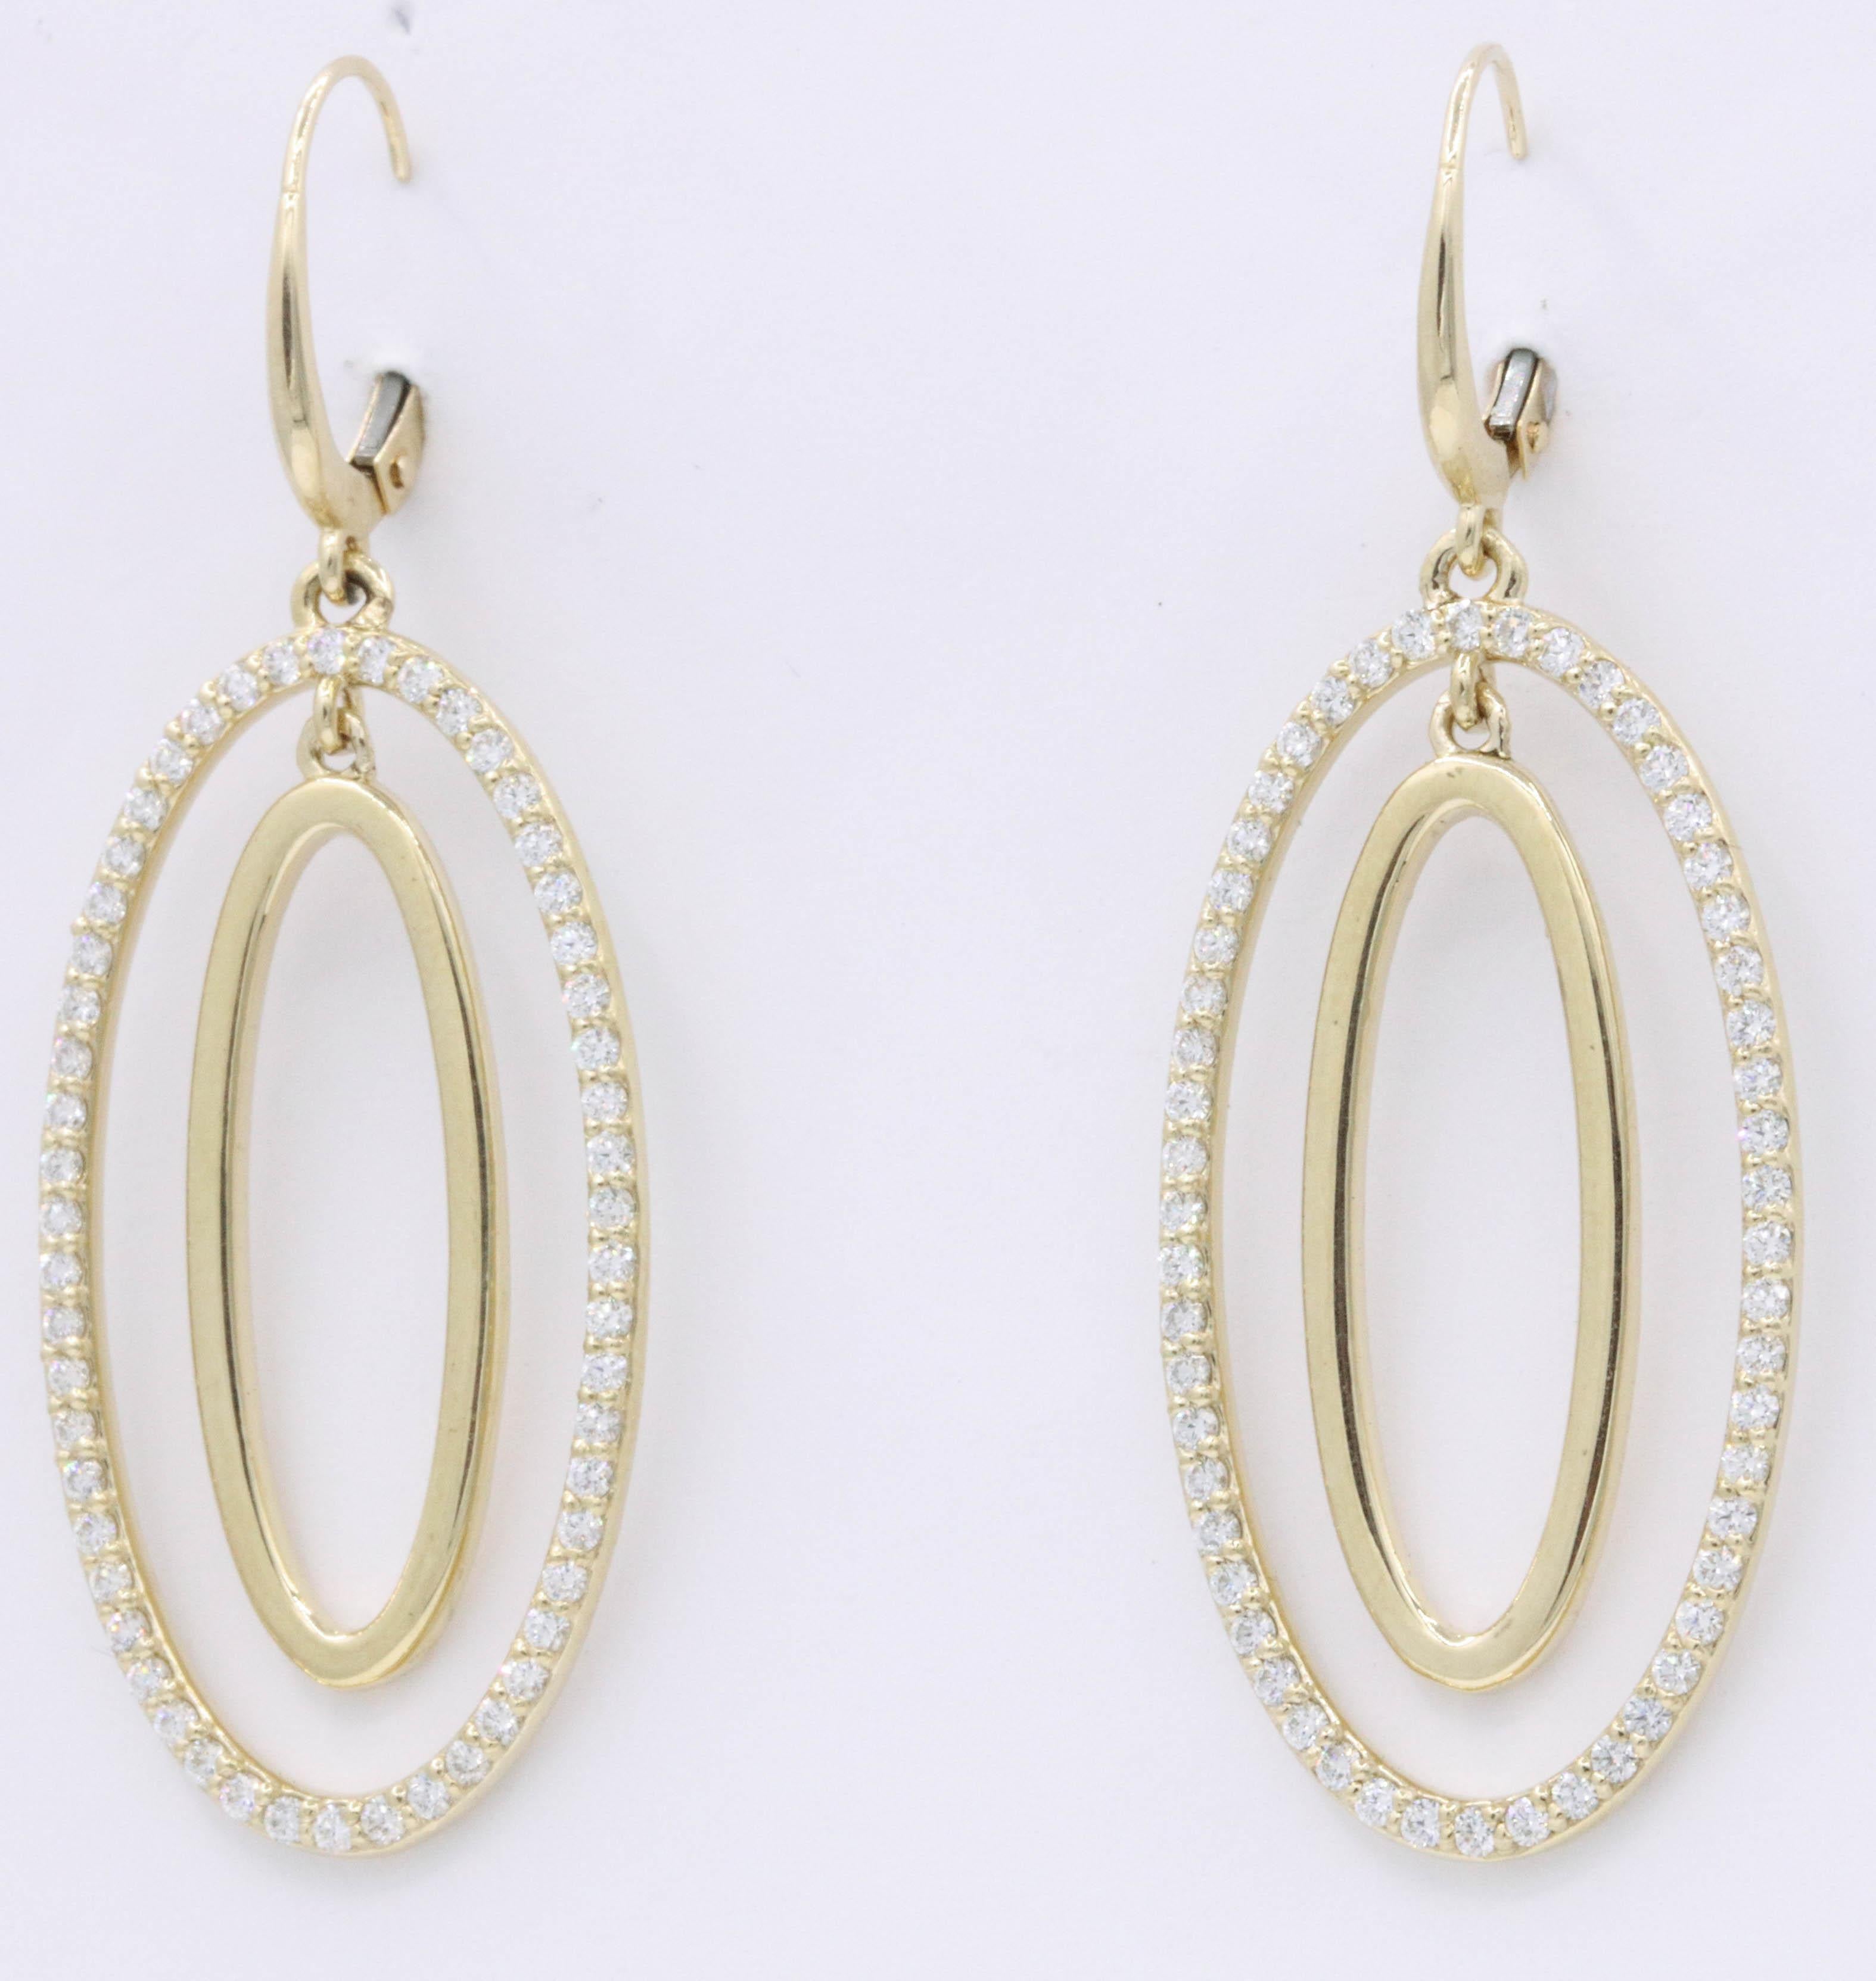 These fun and playful hoop earrings feature 108 round brilliants weighing 1.10 carats, crafted in 14k yellow gold. Very wearable and can be dressed up or down! 